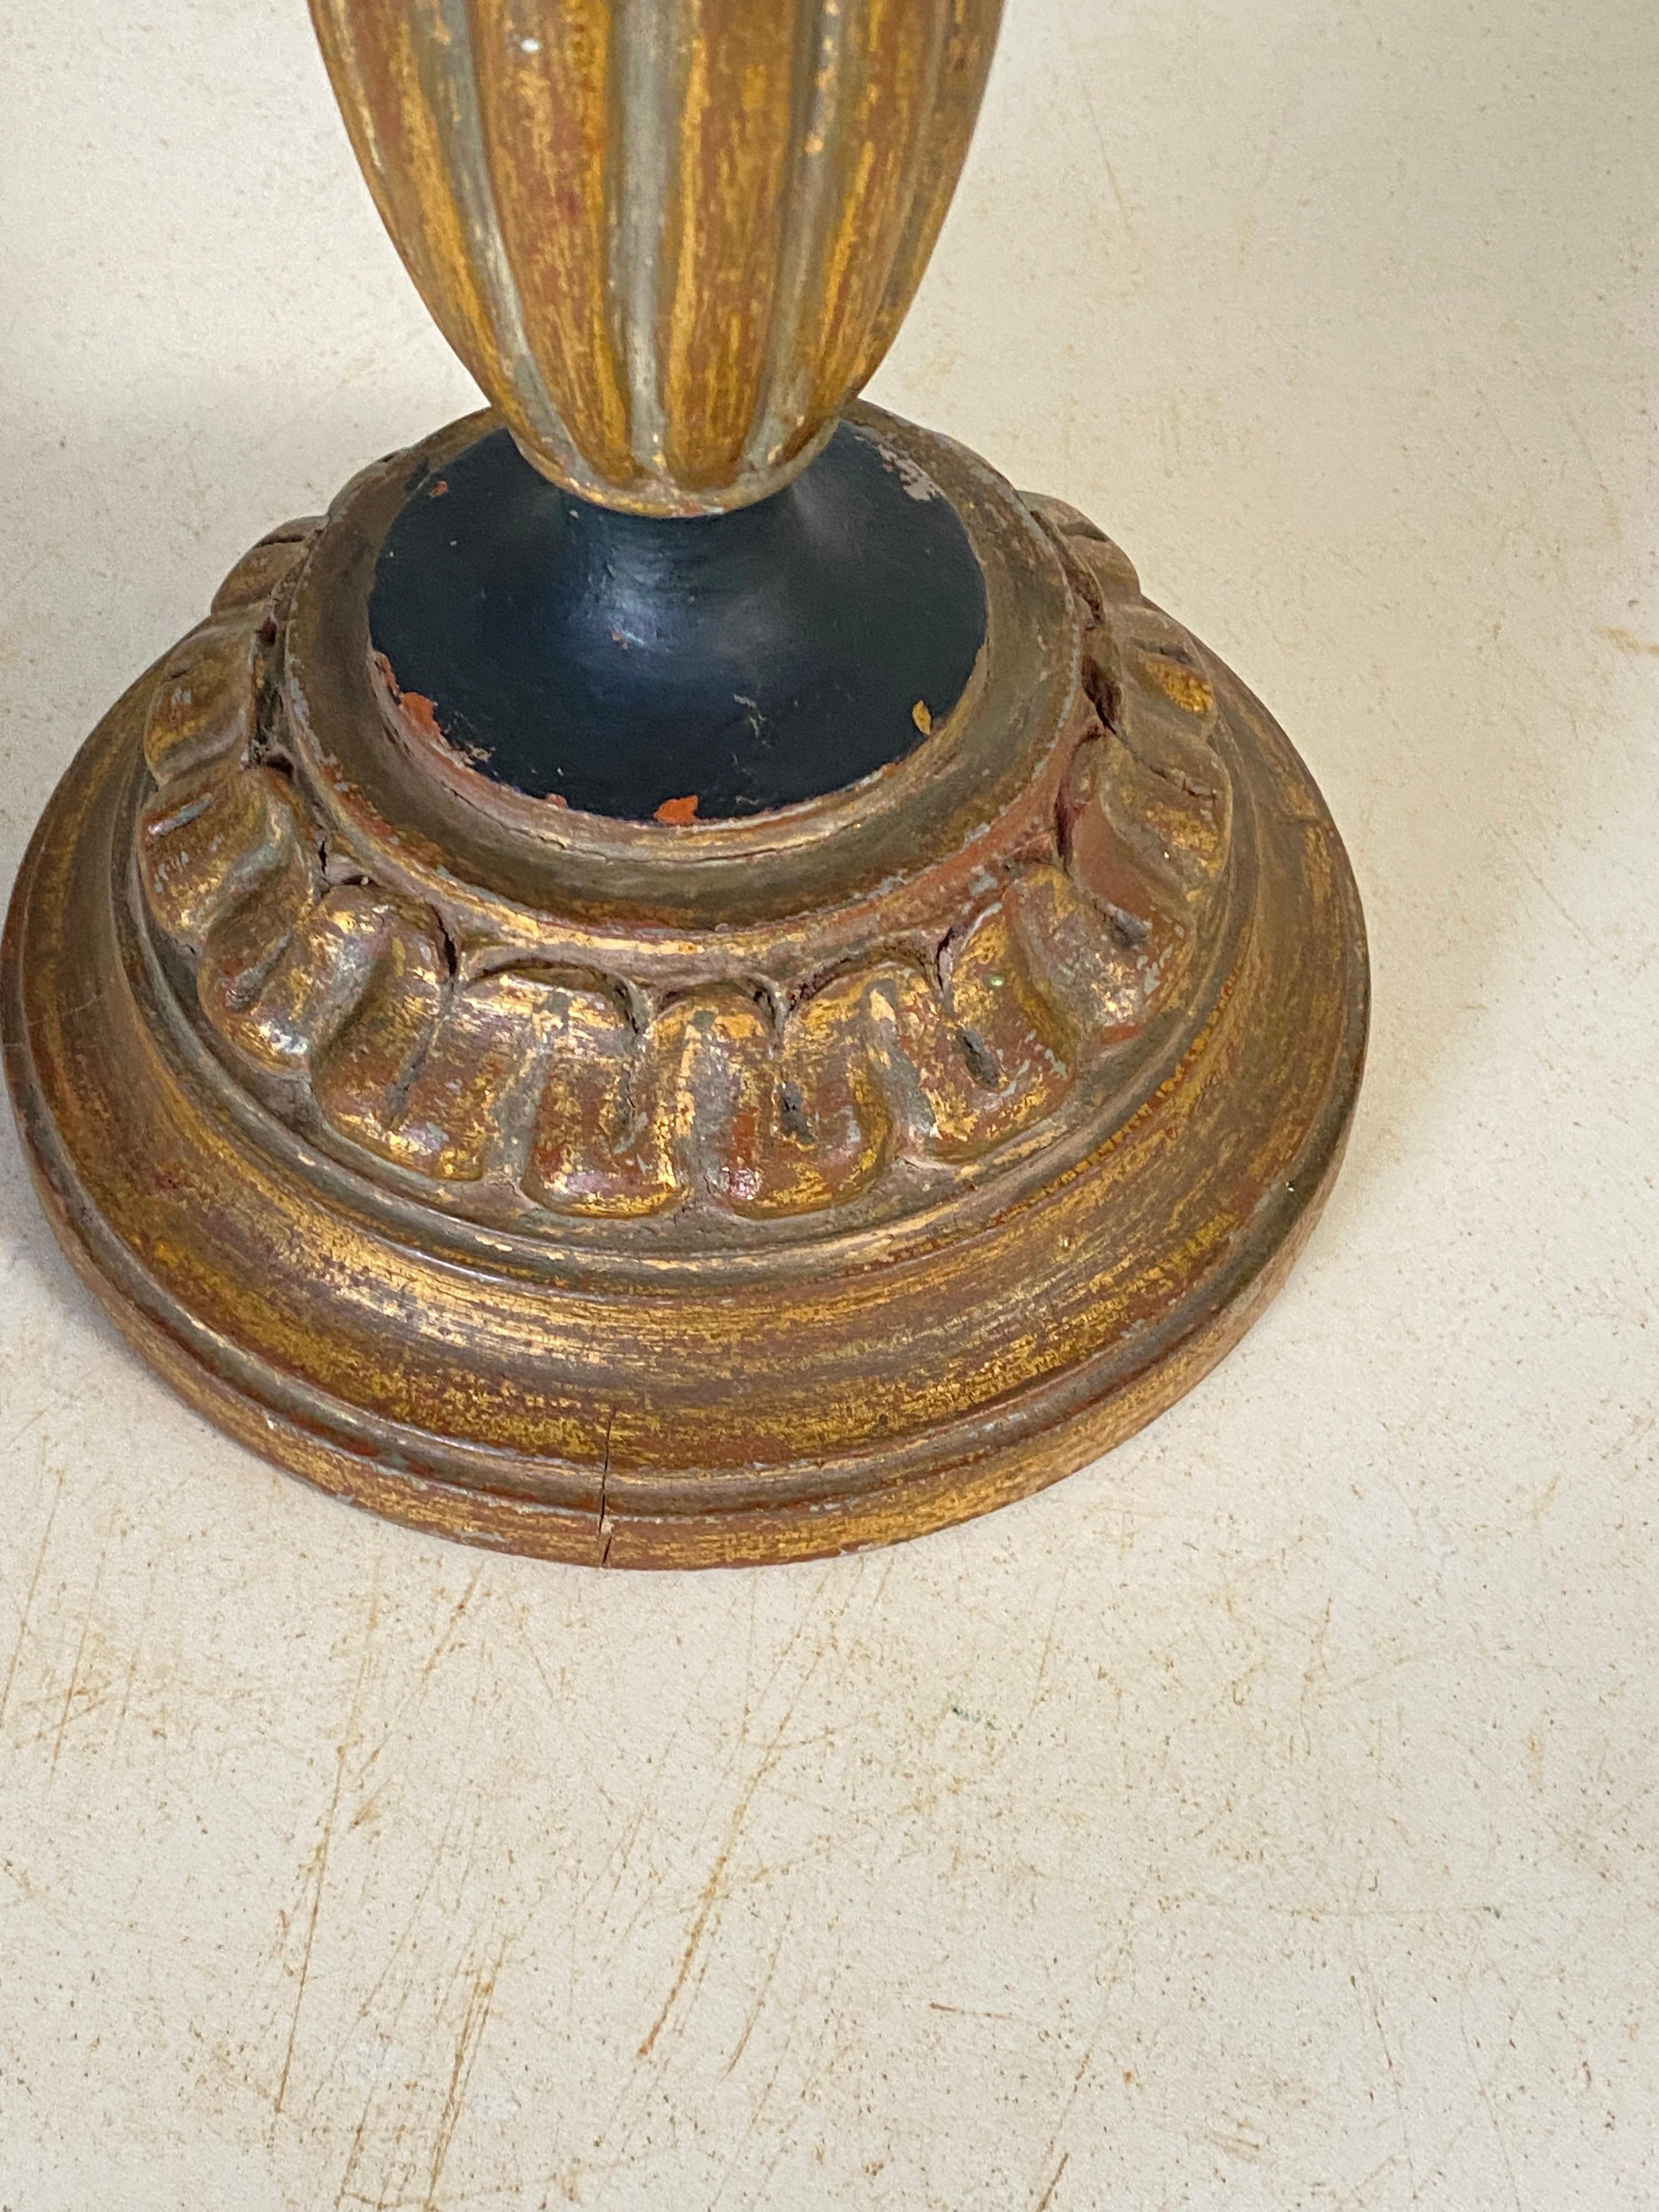 This candle holder or Candlestick  is in Wood with a gold color. It is heavy, and in a very good condition. The patina is beautiful.
It has been made in France in the 1950's.